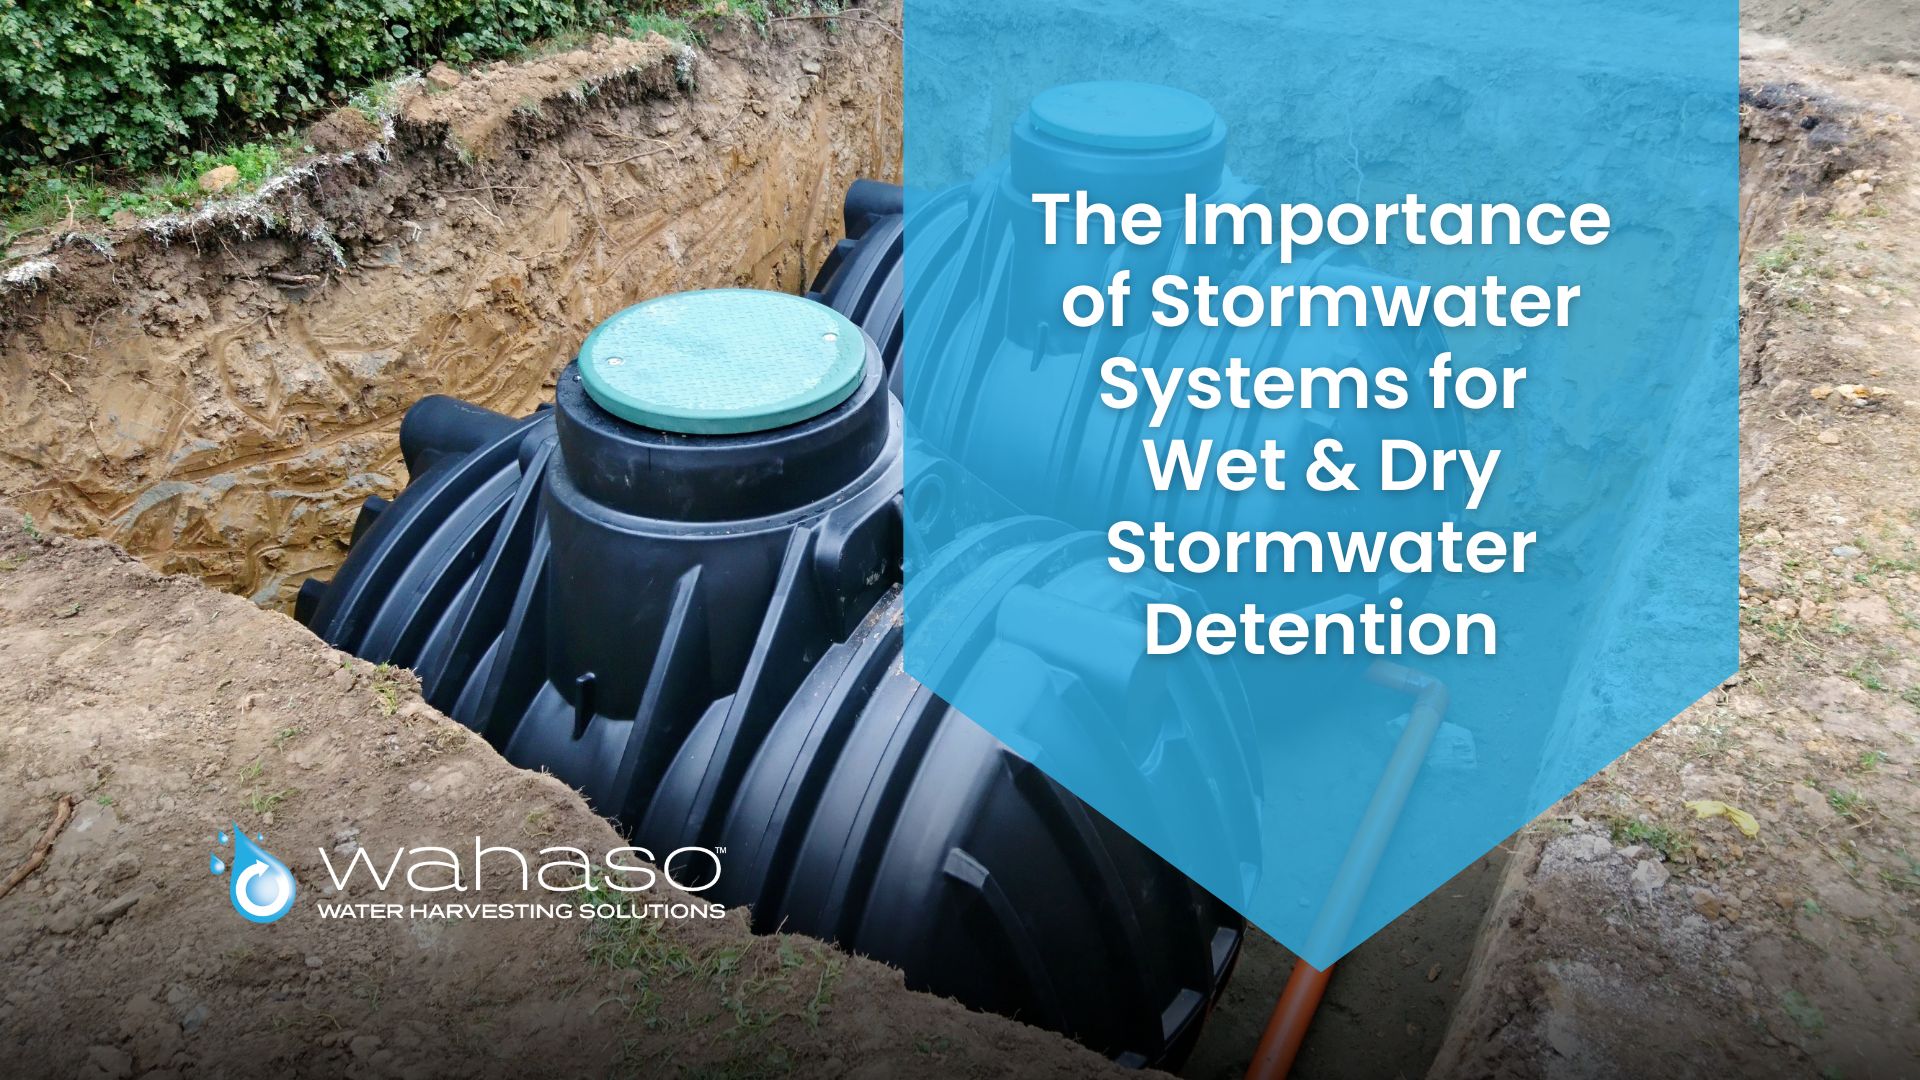 The Importance of Stormwater Systems for Wet and Dry Stormwater Detention